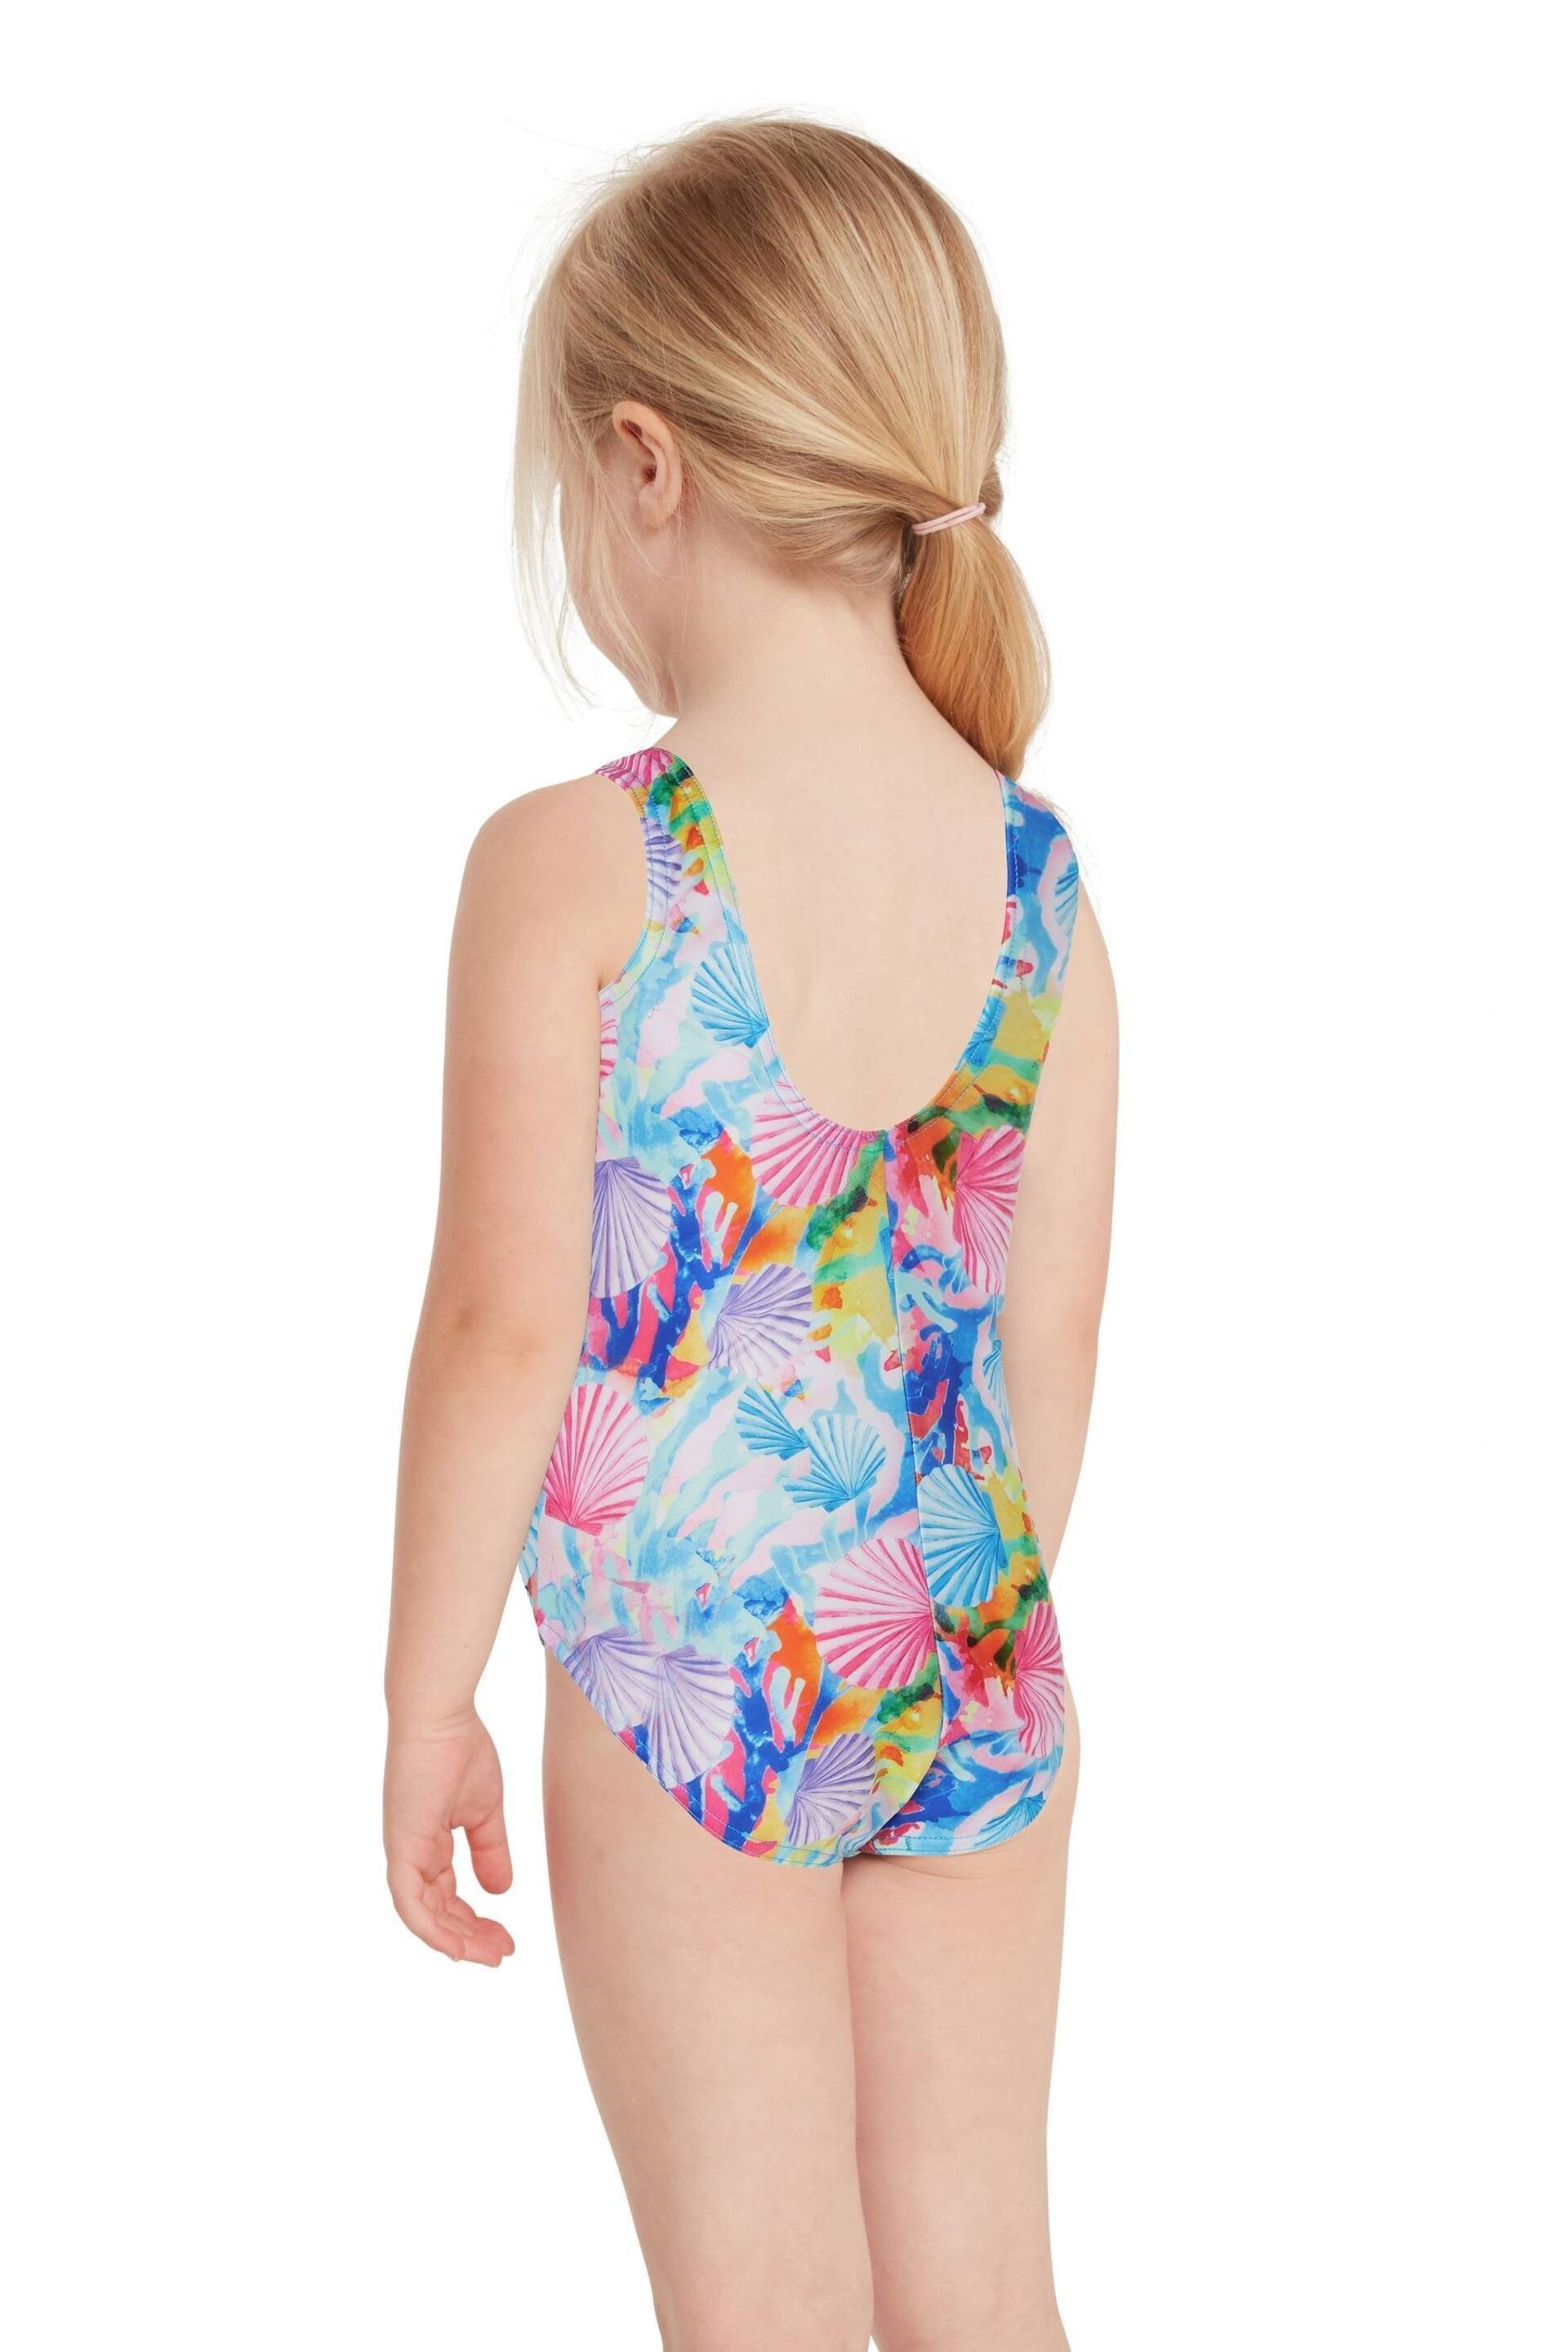 Zoggs Girls Scoopback One Piece Swimsuit - Image 4 of 7